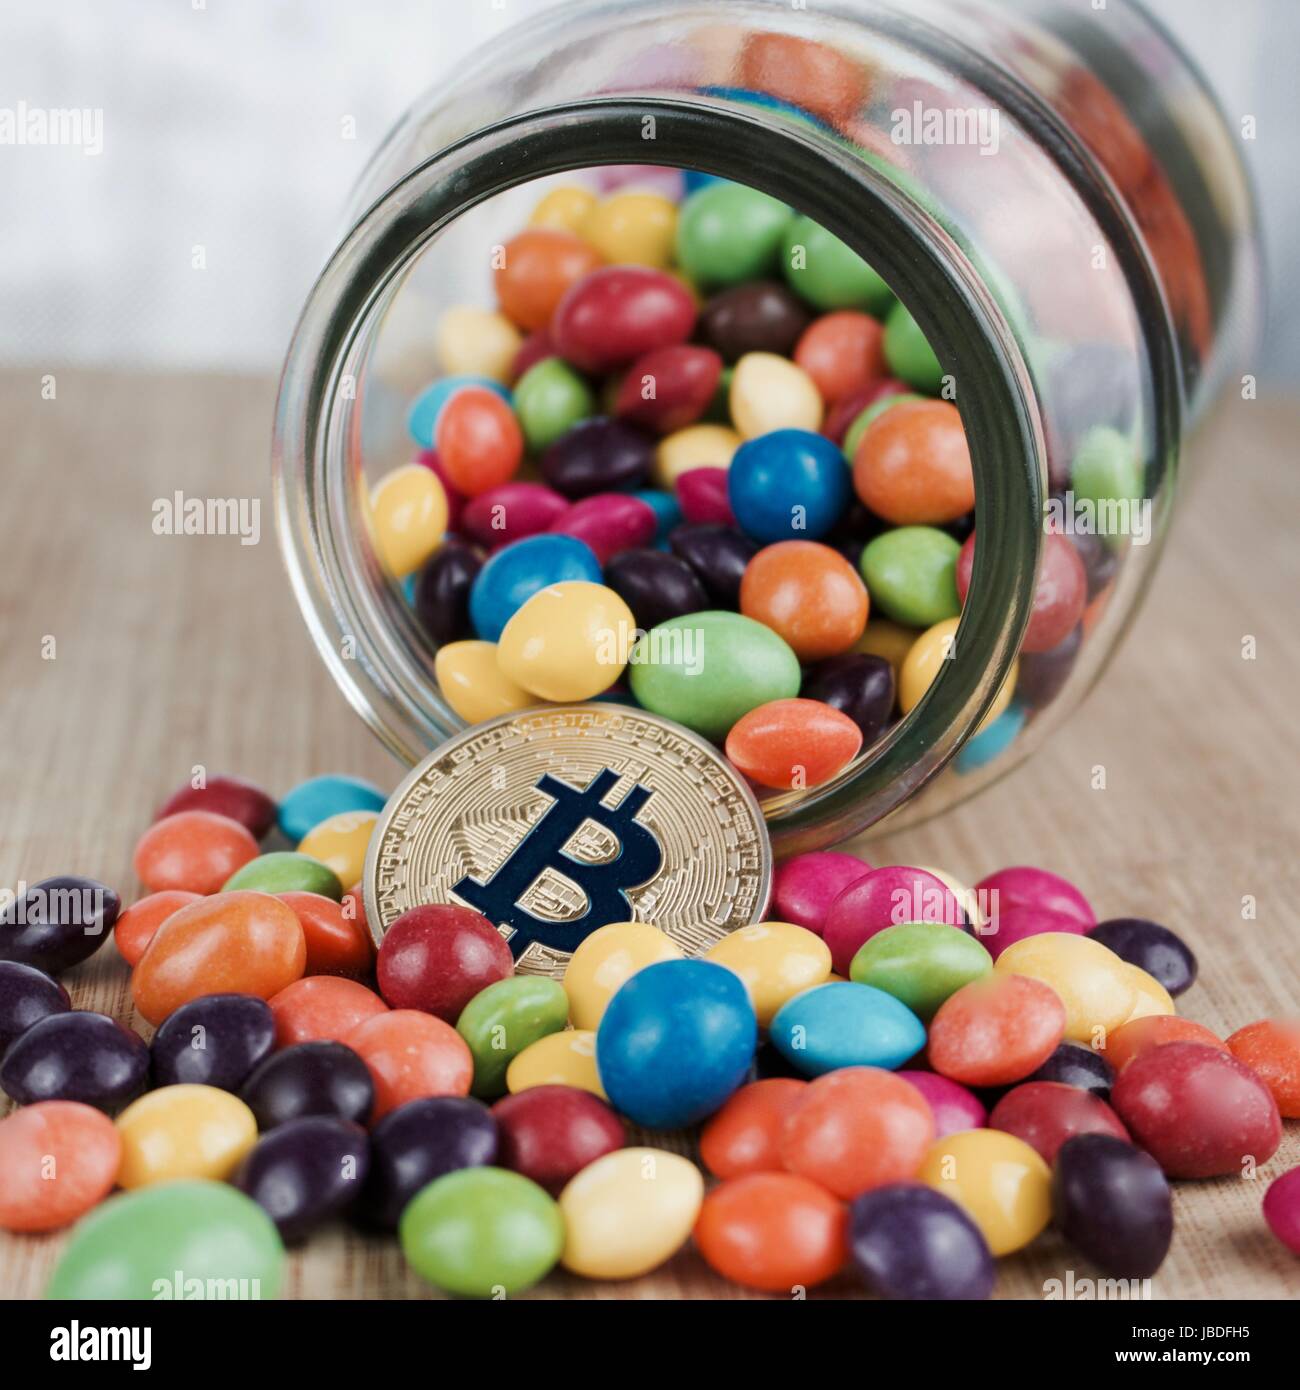 Btc candy rent industrial space for mining ethereum